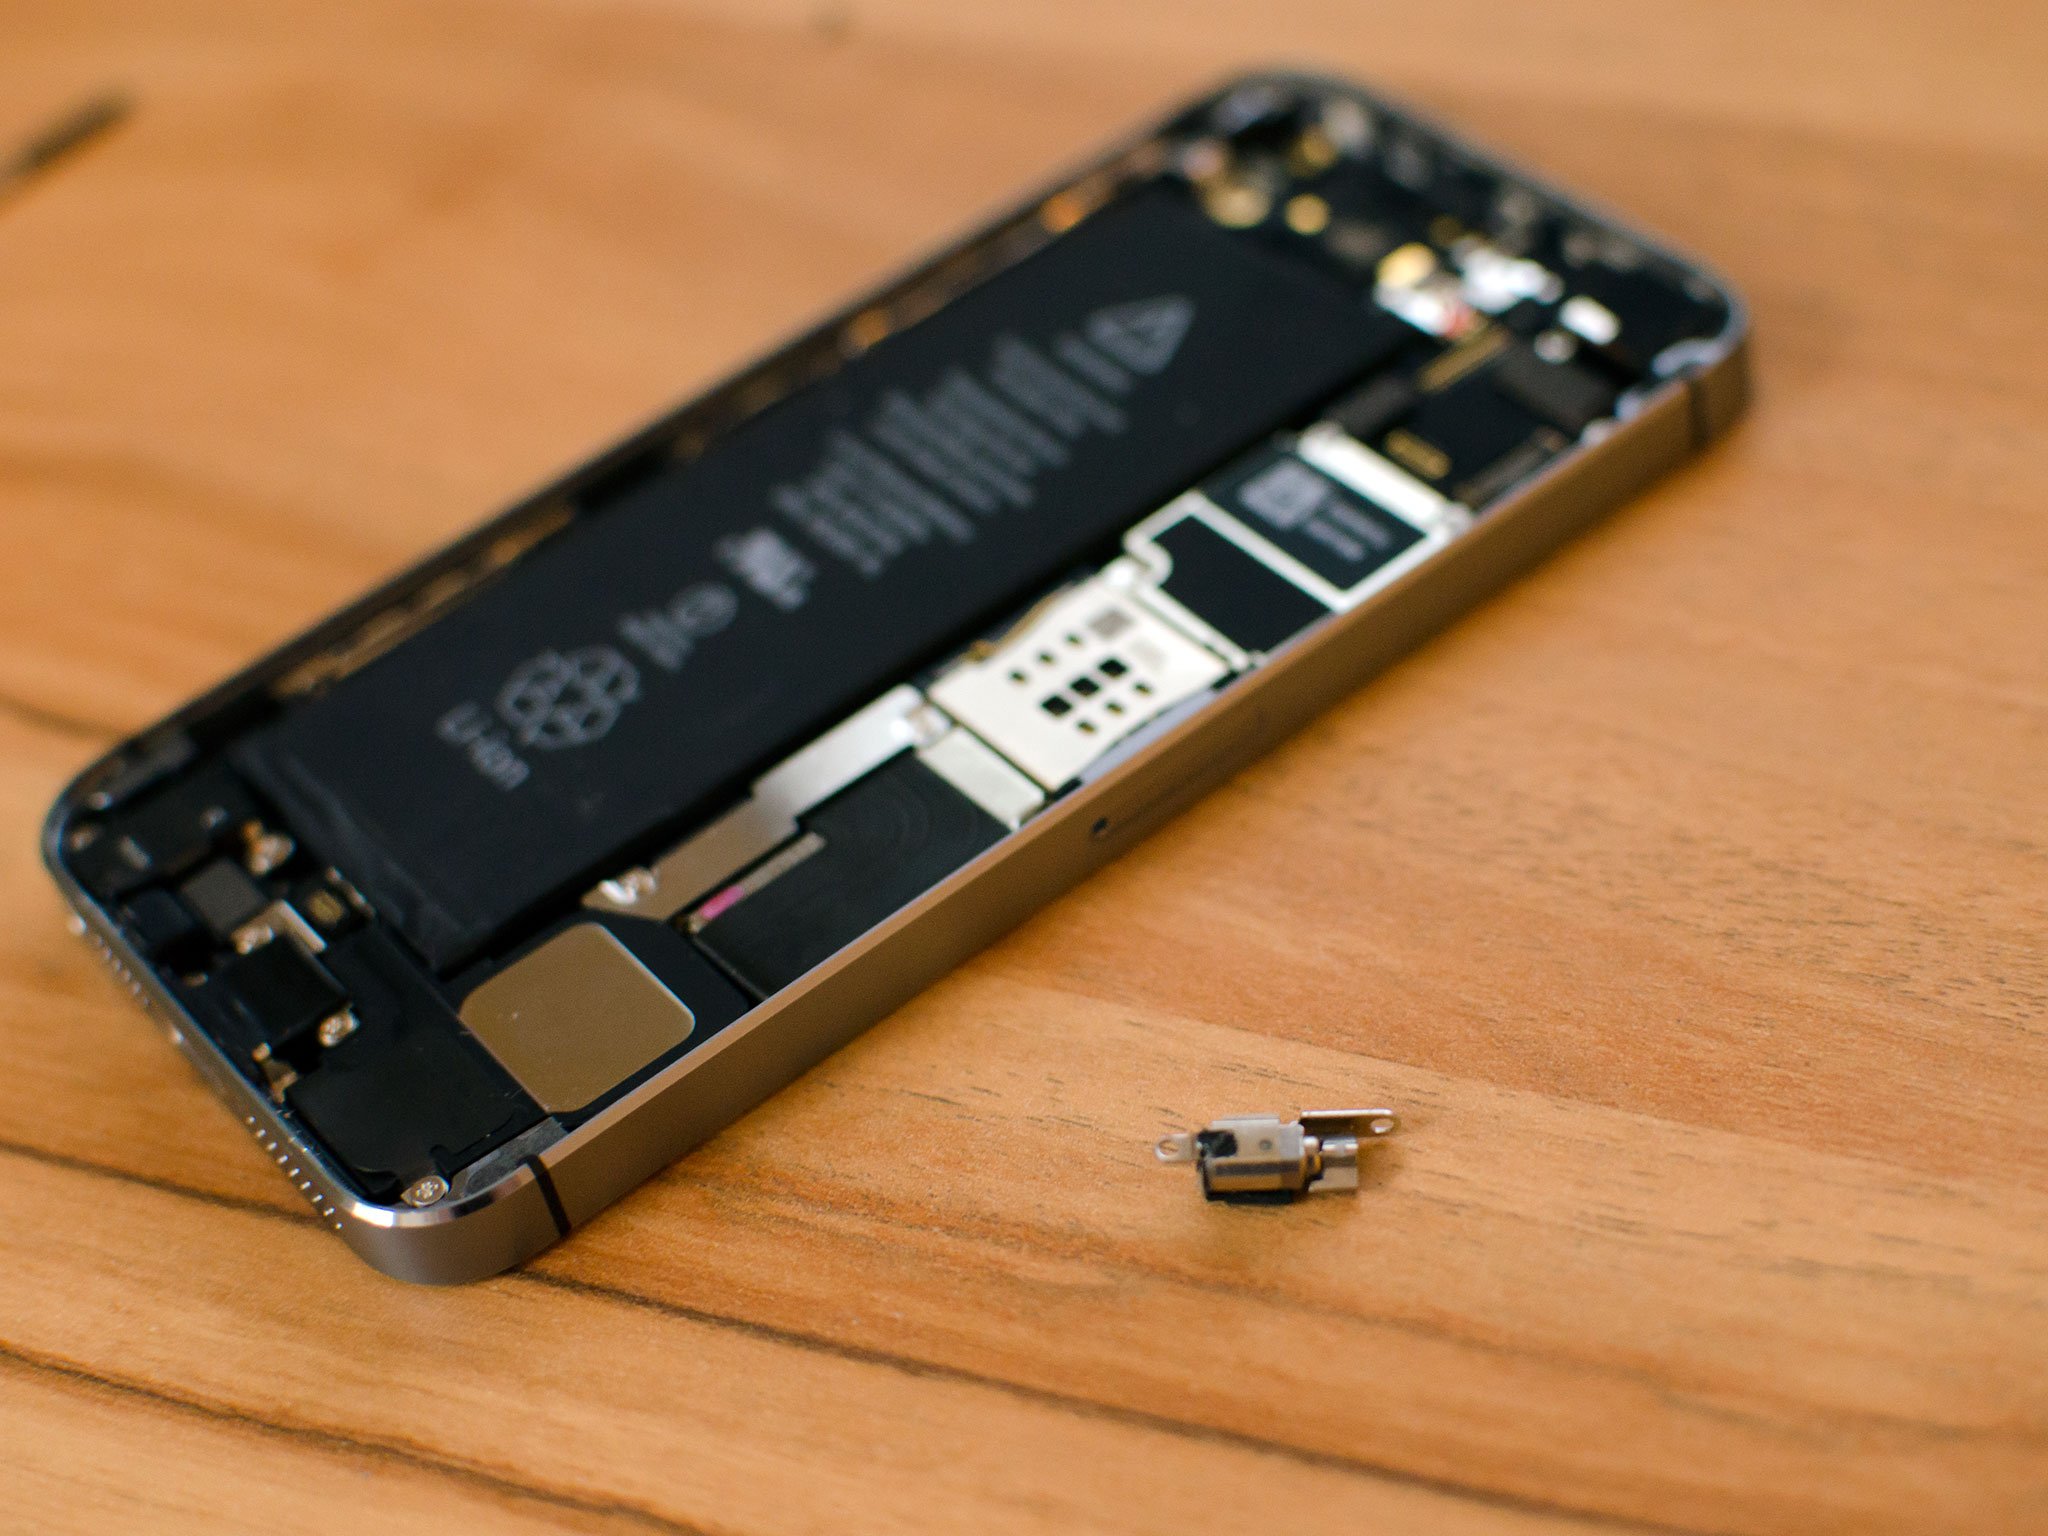 How to replace a broken vibrator in an iPhone 5s